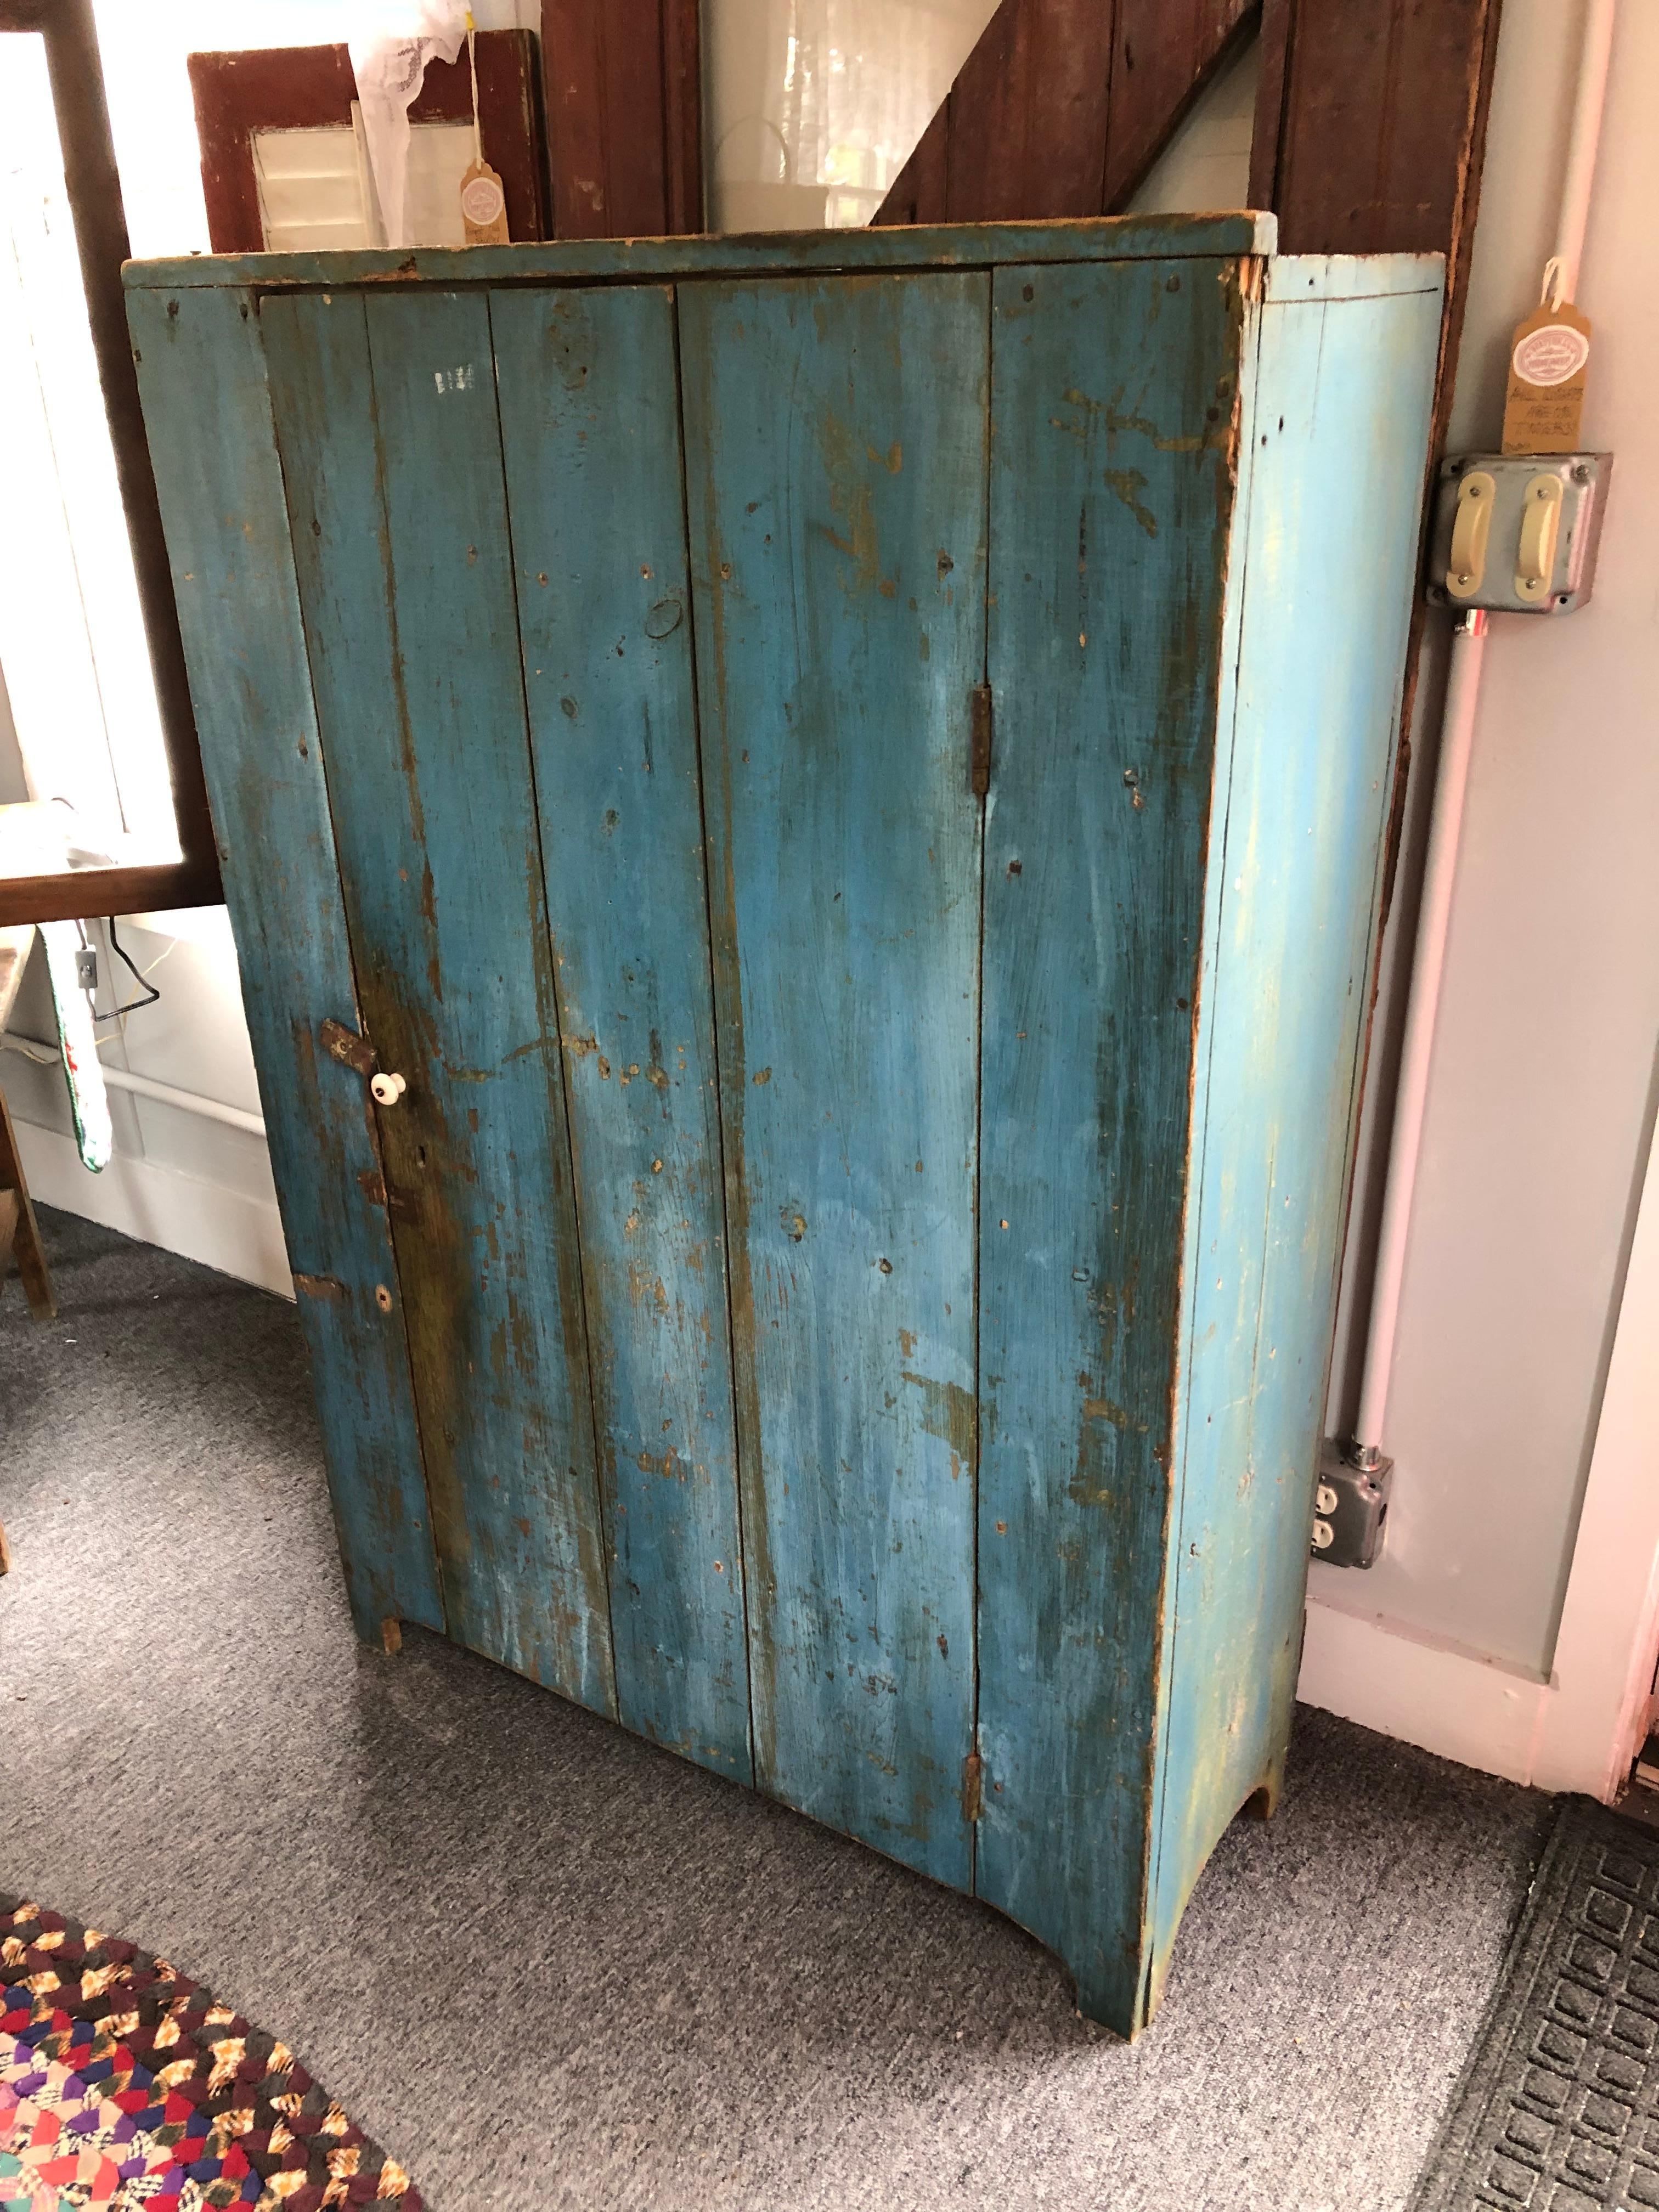 Super striking and charming New Hampshire country Primitive cupboard having reclaimed wood farm house style door and interior shelves for storage. The color is a marvelous weathered turquoise.
Shelves are 11.25 deep with 9